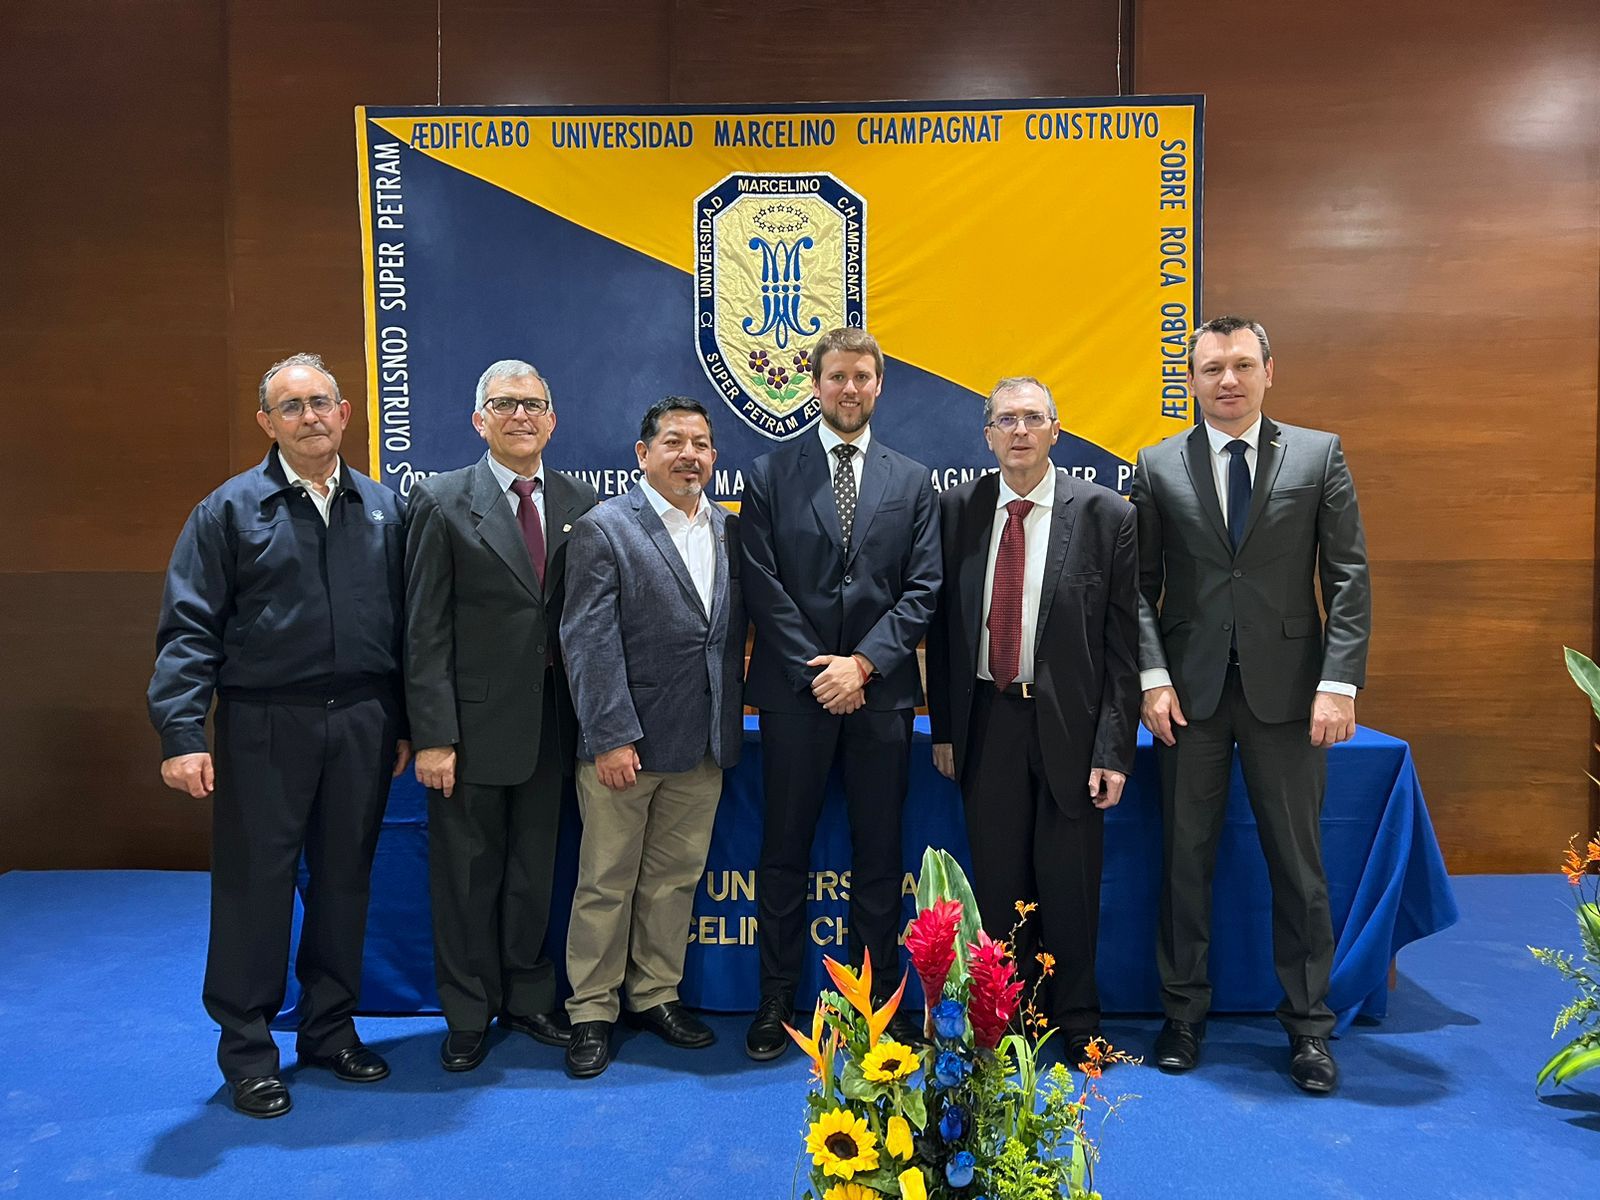 PUCRS’ Senior Vice President visits two higher education institutions in Latin America